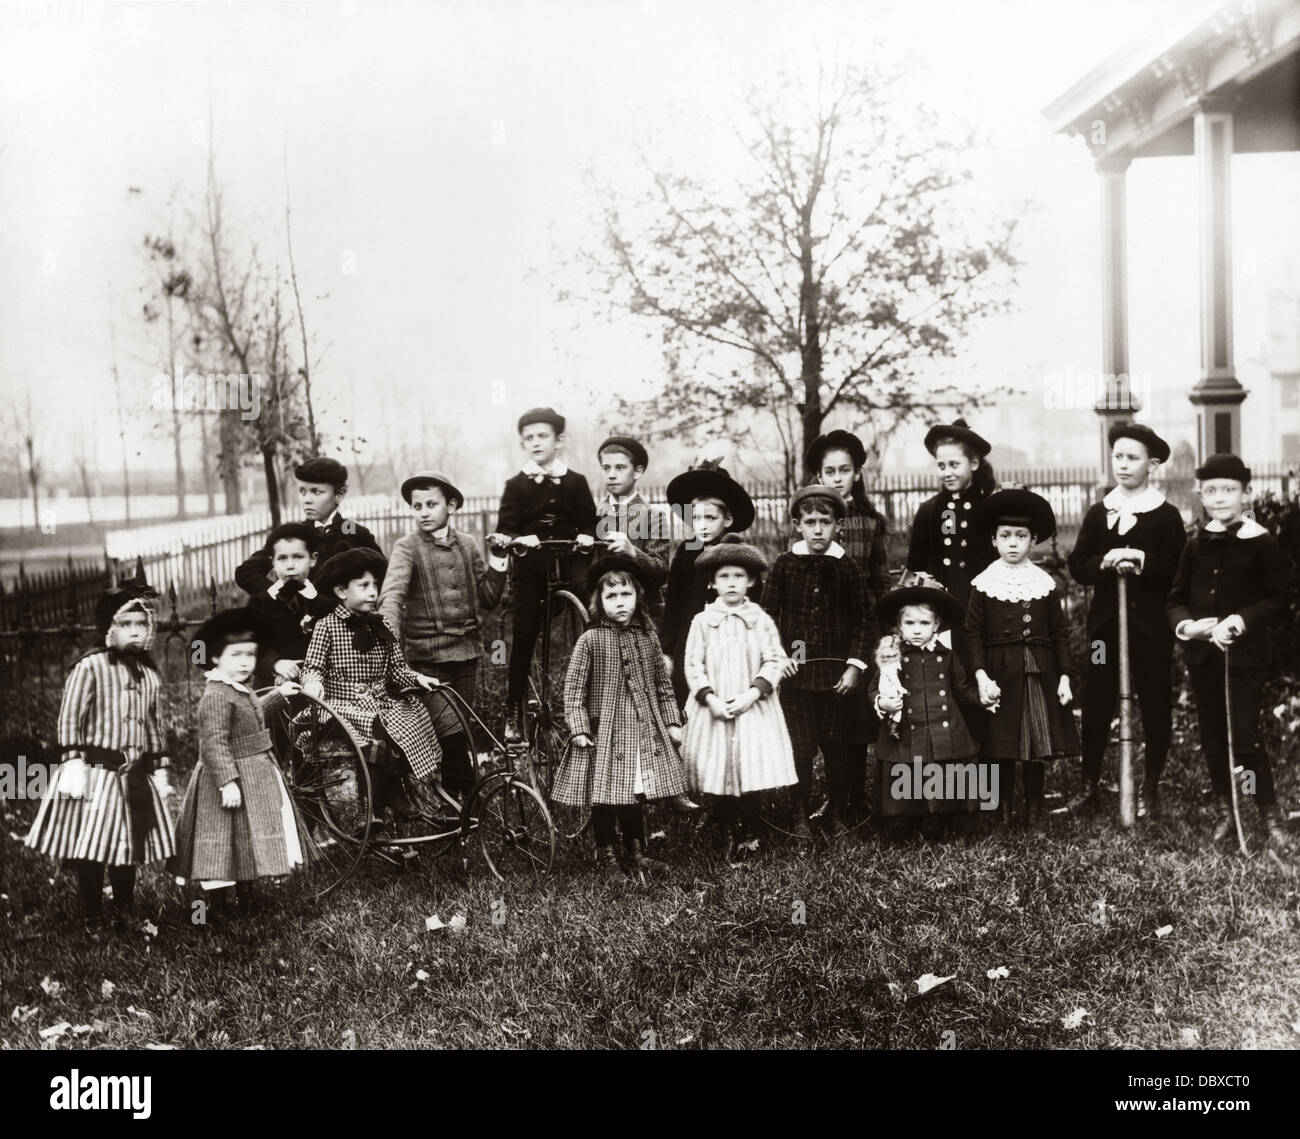 1890s 1900s POSED GROUP PORTRAIT OF 18 TURN OF THE 20TH CENTURY NEIGHBORHOOD CHILDREN ASSEMBLED IN SUBURBAN FRONT YARD Stock Photo